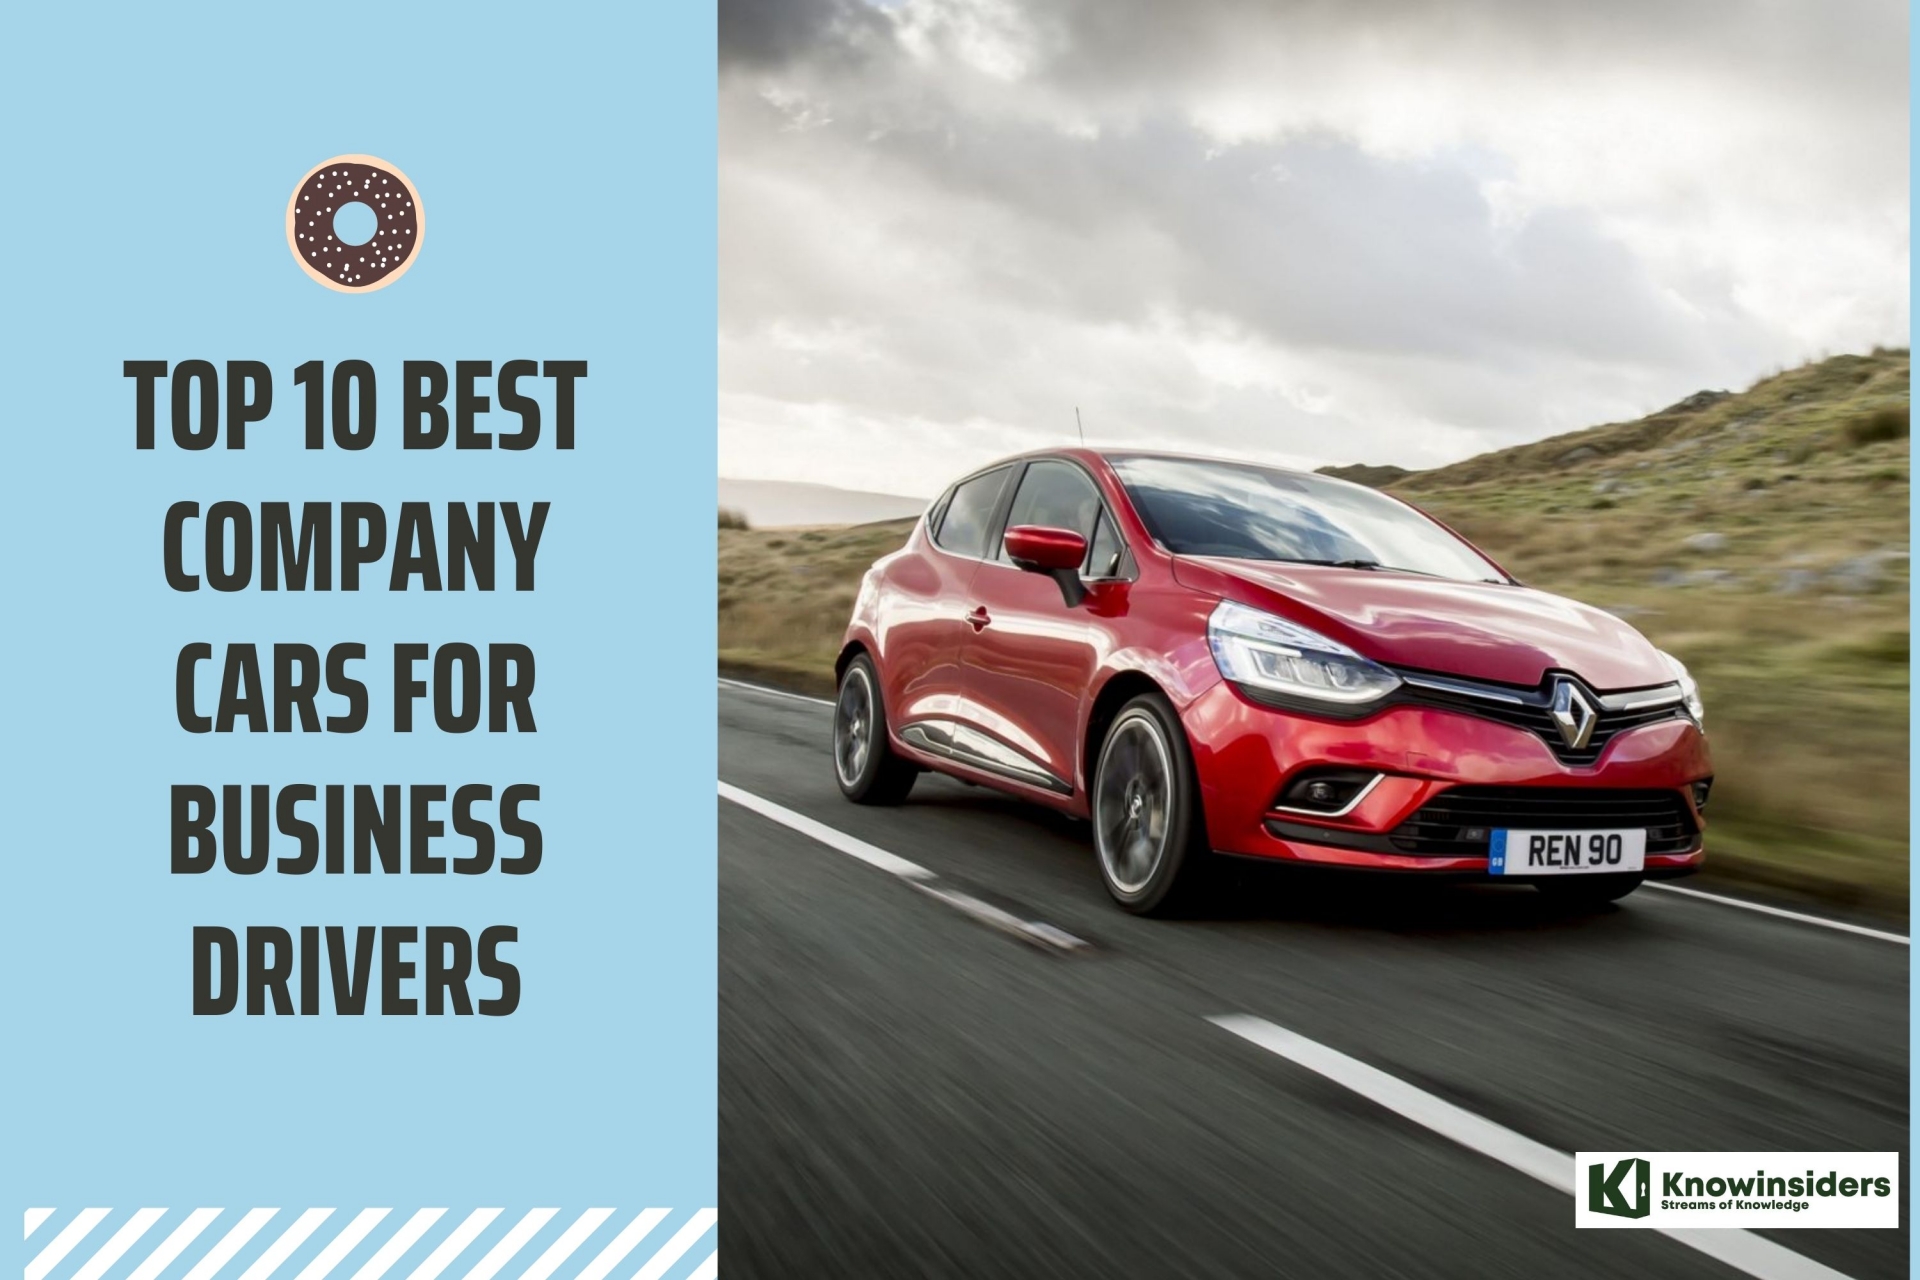 Top 10 Best Company Cars for Business Drivers